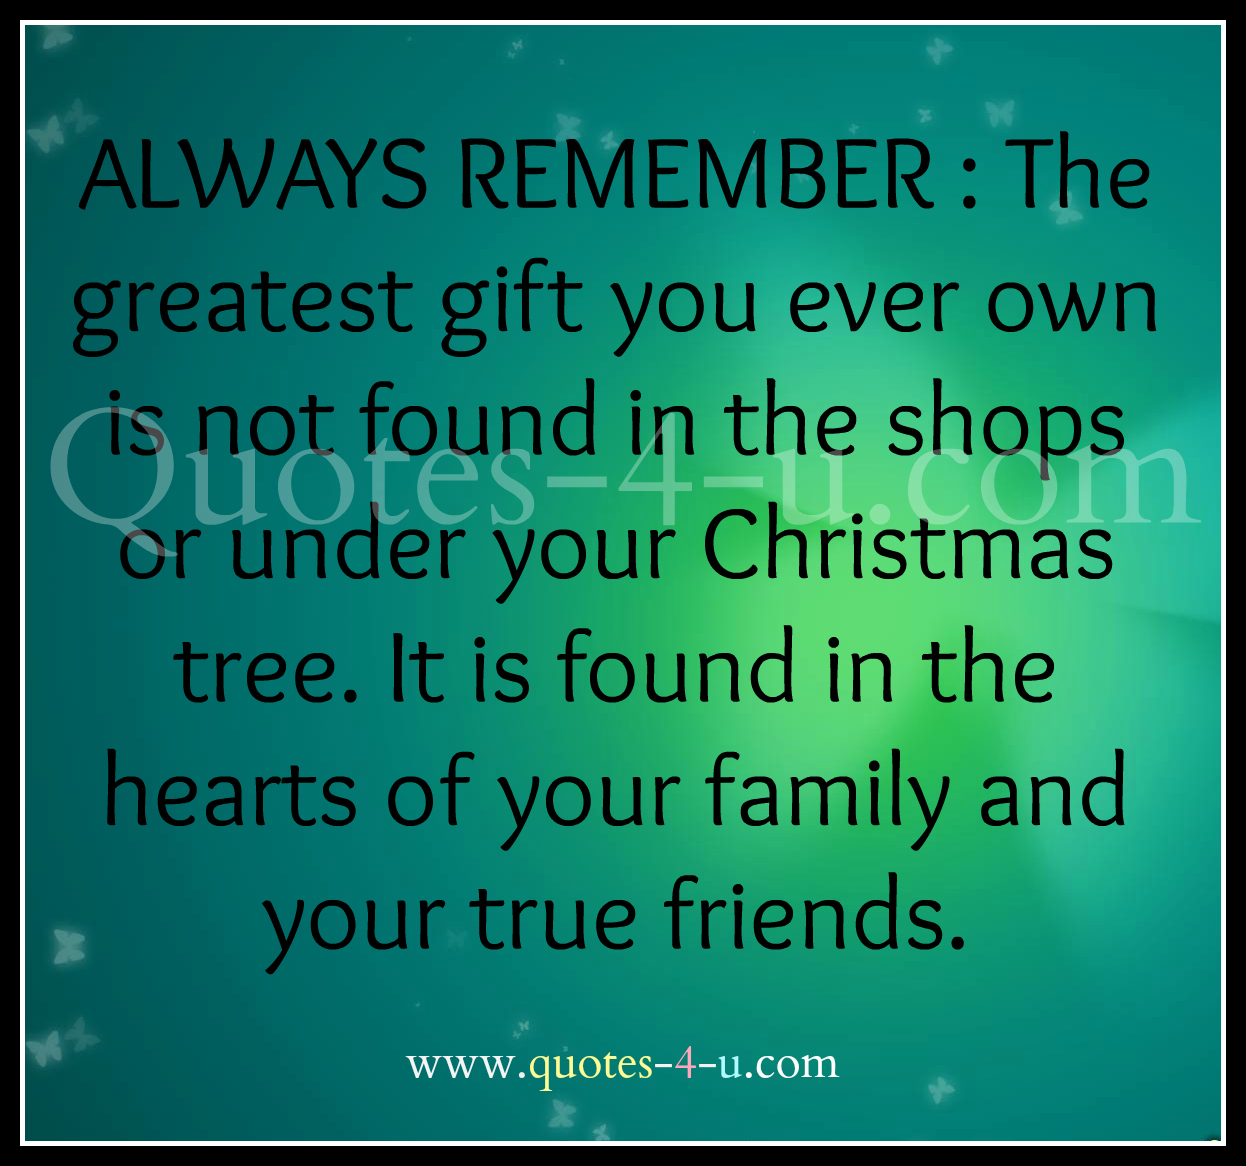 Christian Inspirational Quotes Family Friends. QuotesGram